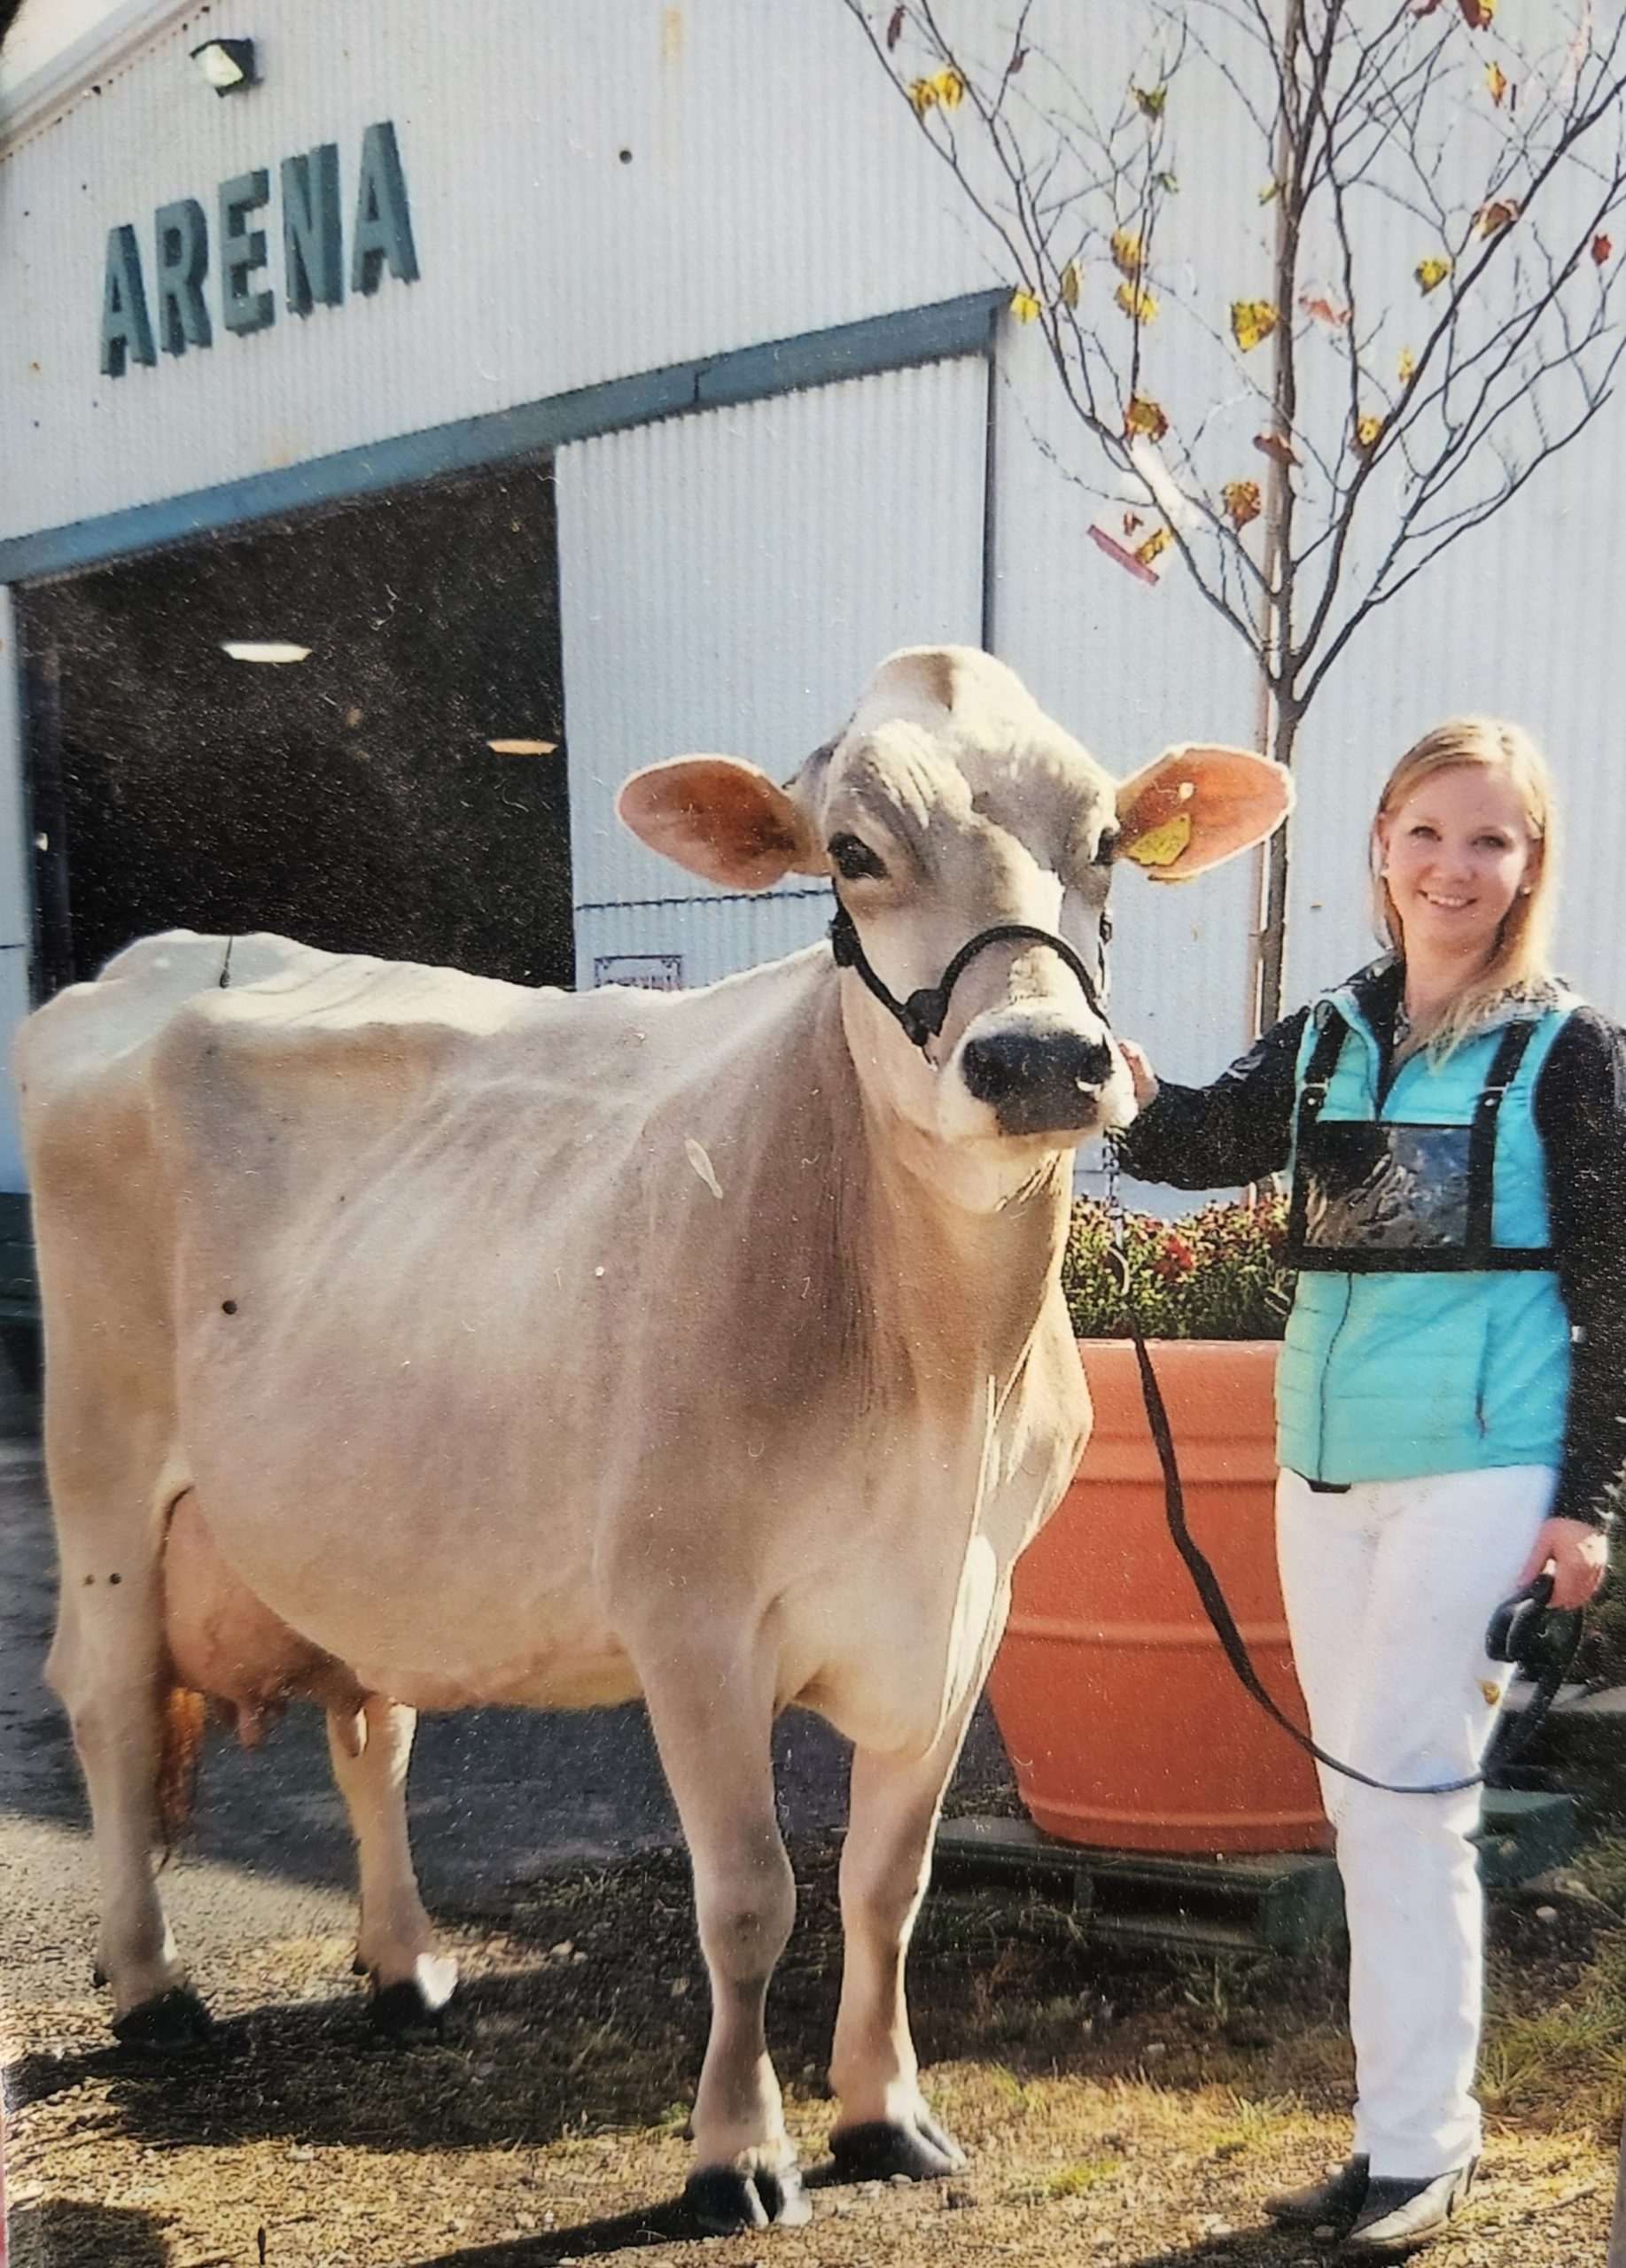 A dairy farmer, dressed in a blue vest and white pants, standing with a cow outside a barn.